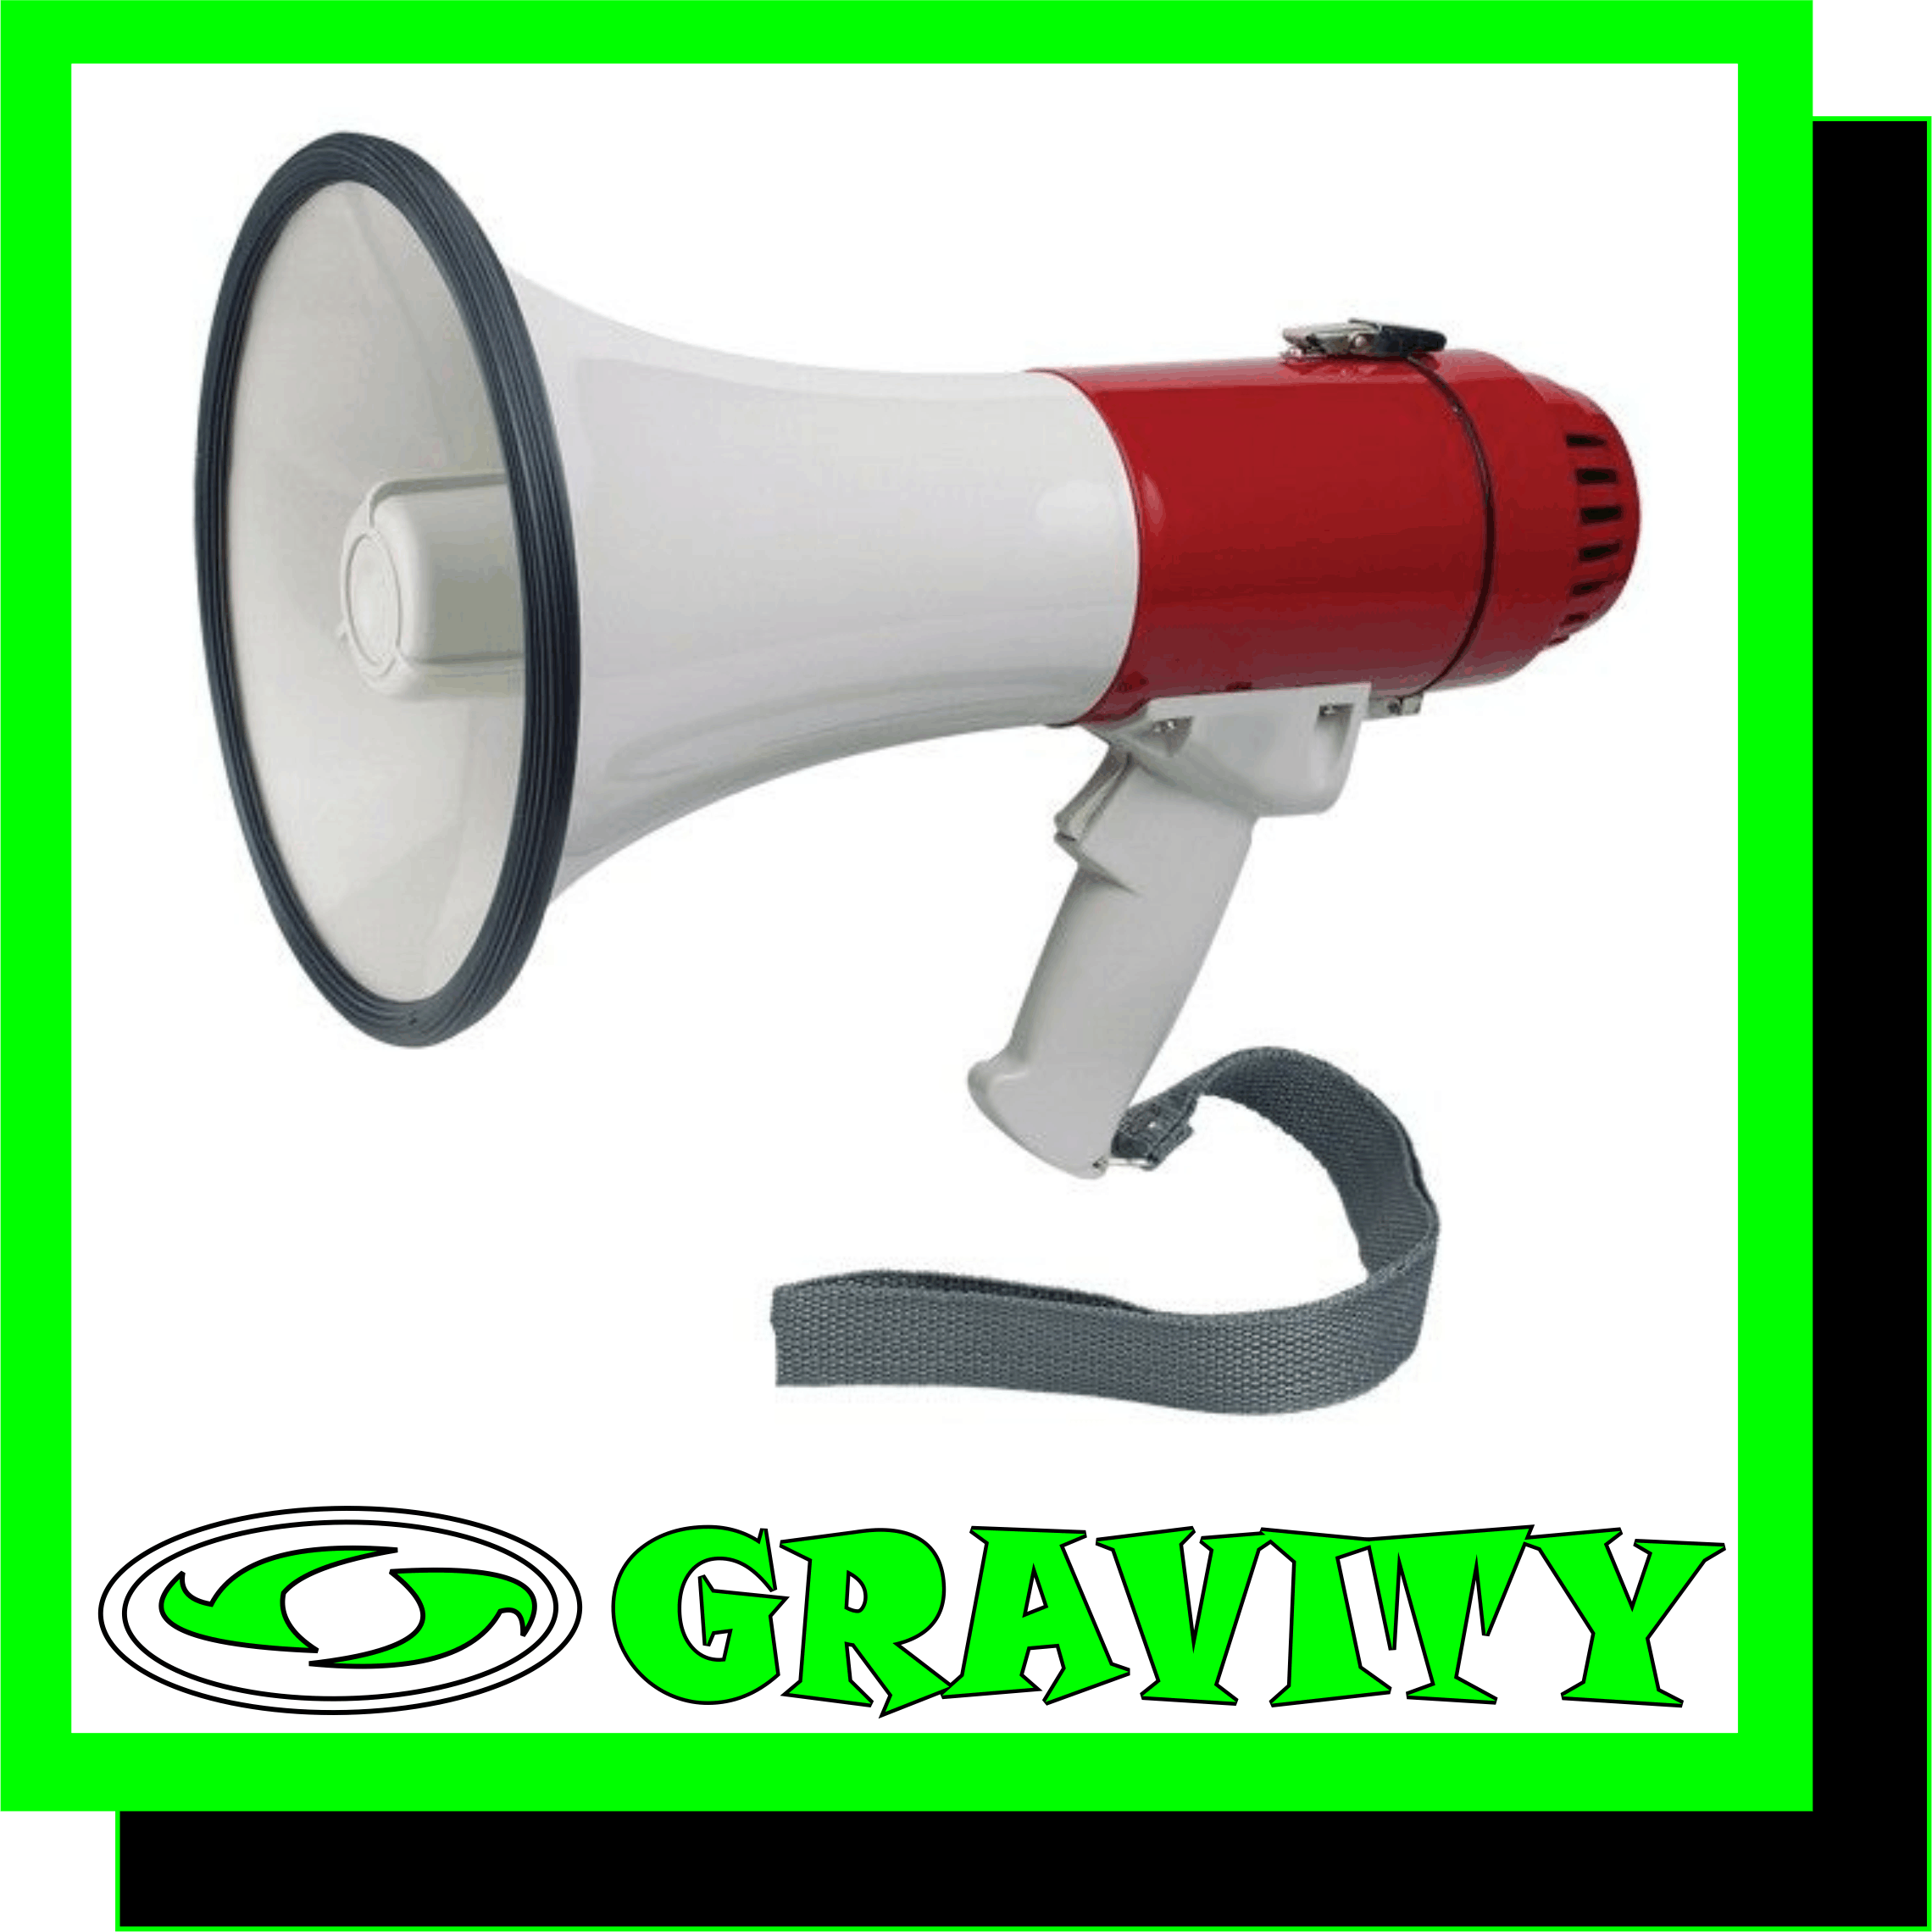 -15w Megaphone  -Siren to get attention fast  -Pistol grip talk switch and siren switch  -Adjustable volume  -Complete with built in microphone  -Shoulder strap  -20 second Recording function  -With Rechargeable battery   -Outdoor range of 350m  -Horn Diameter 155mm